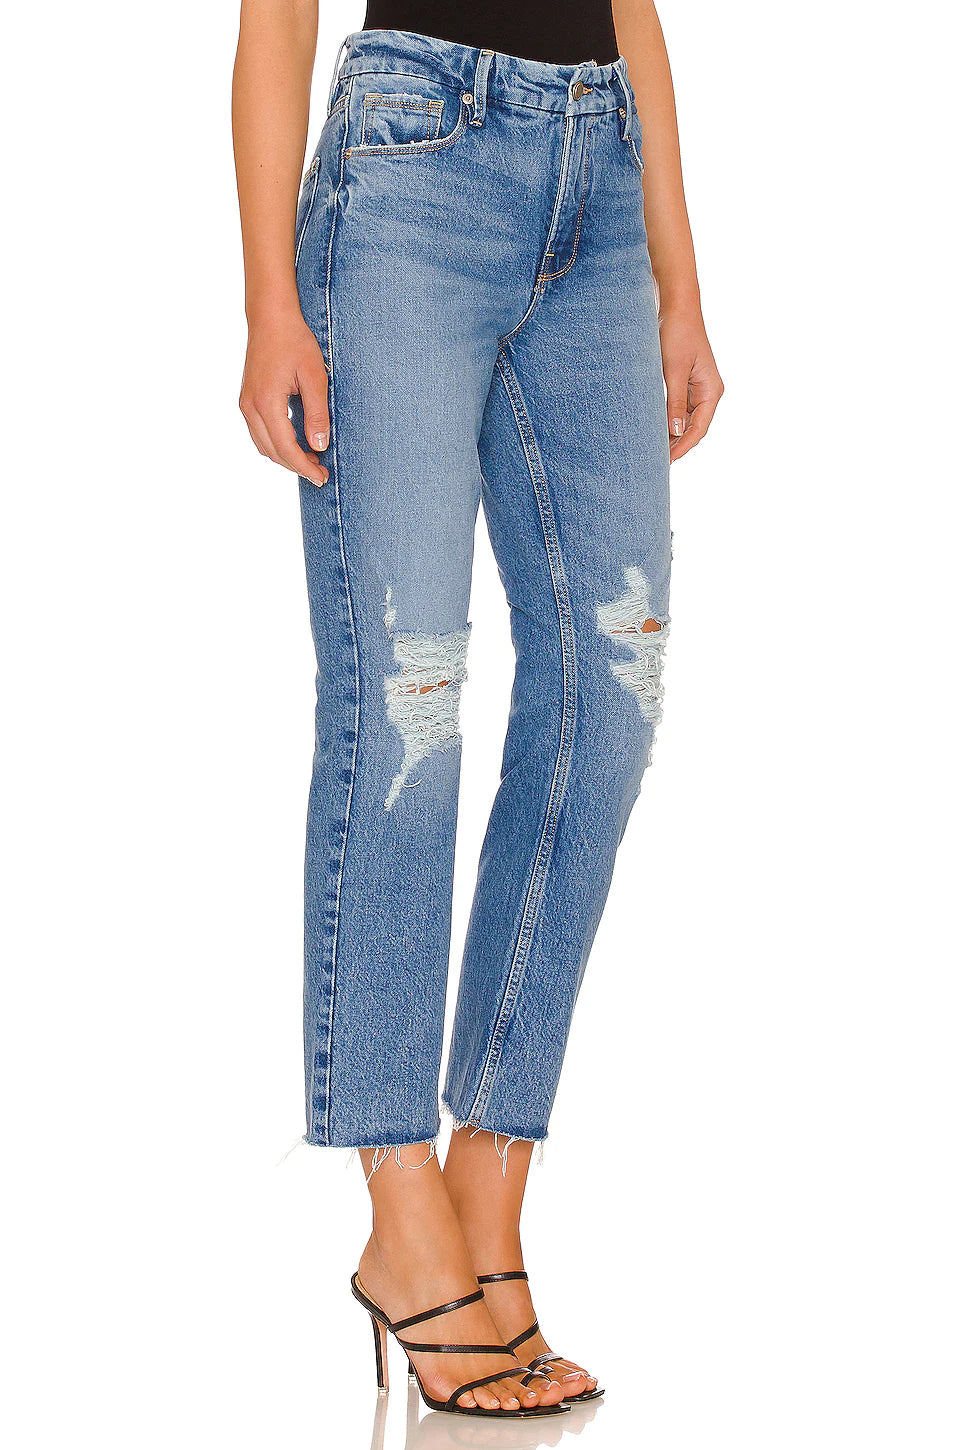 Good Icon Crop Jeans